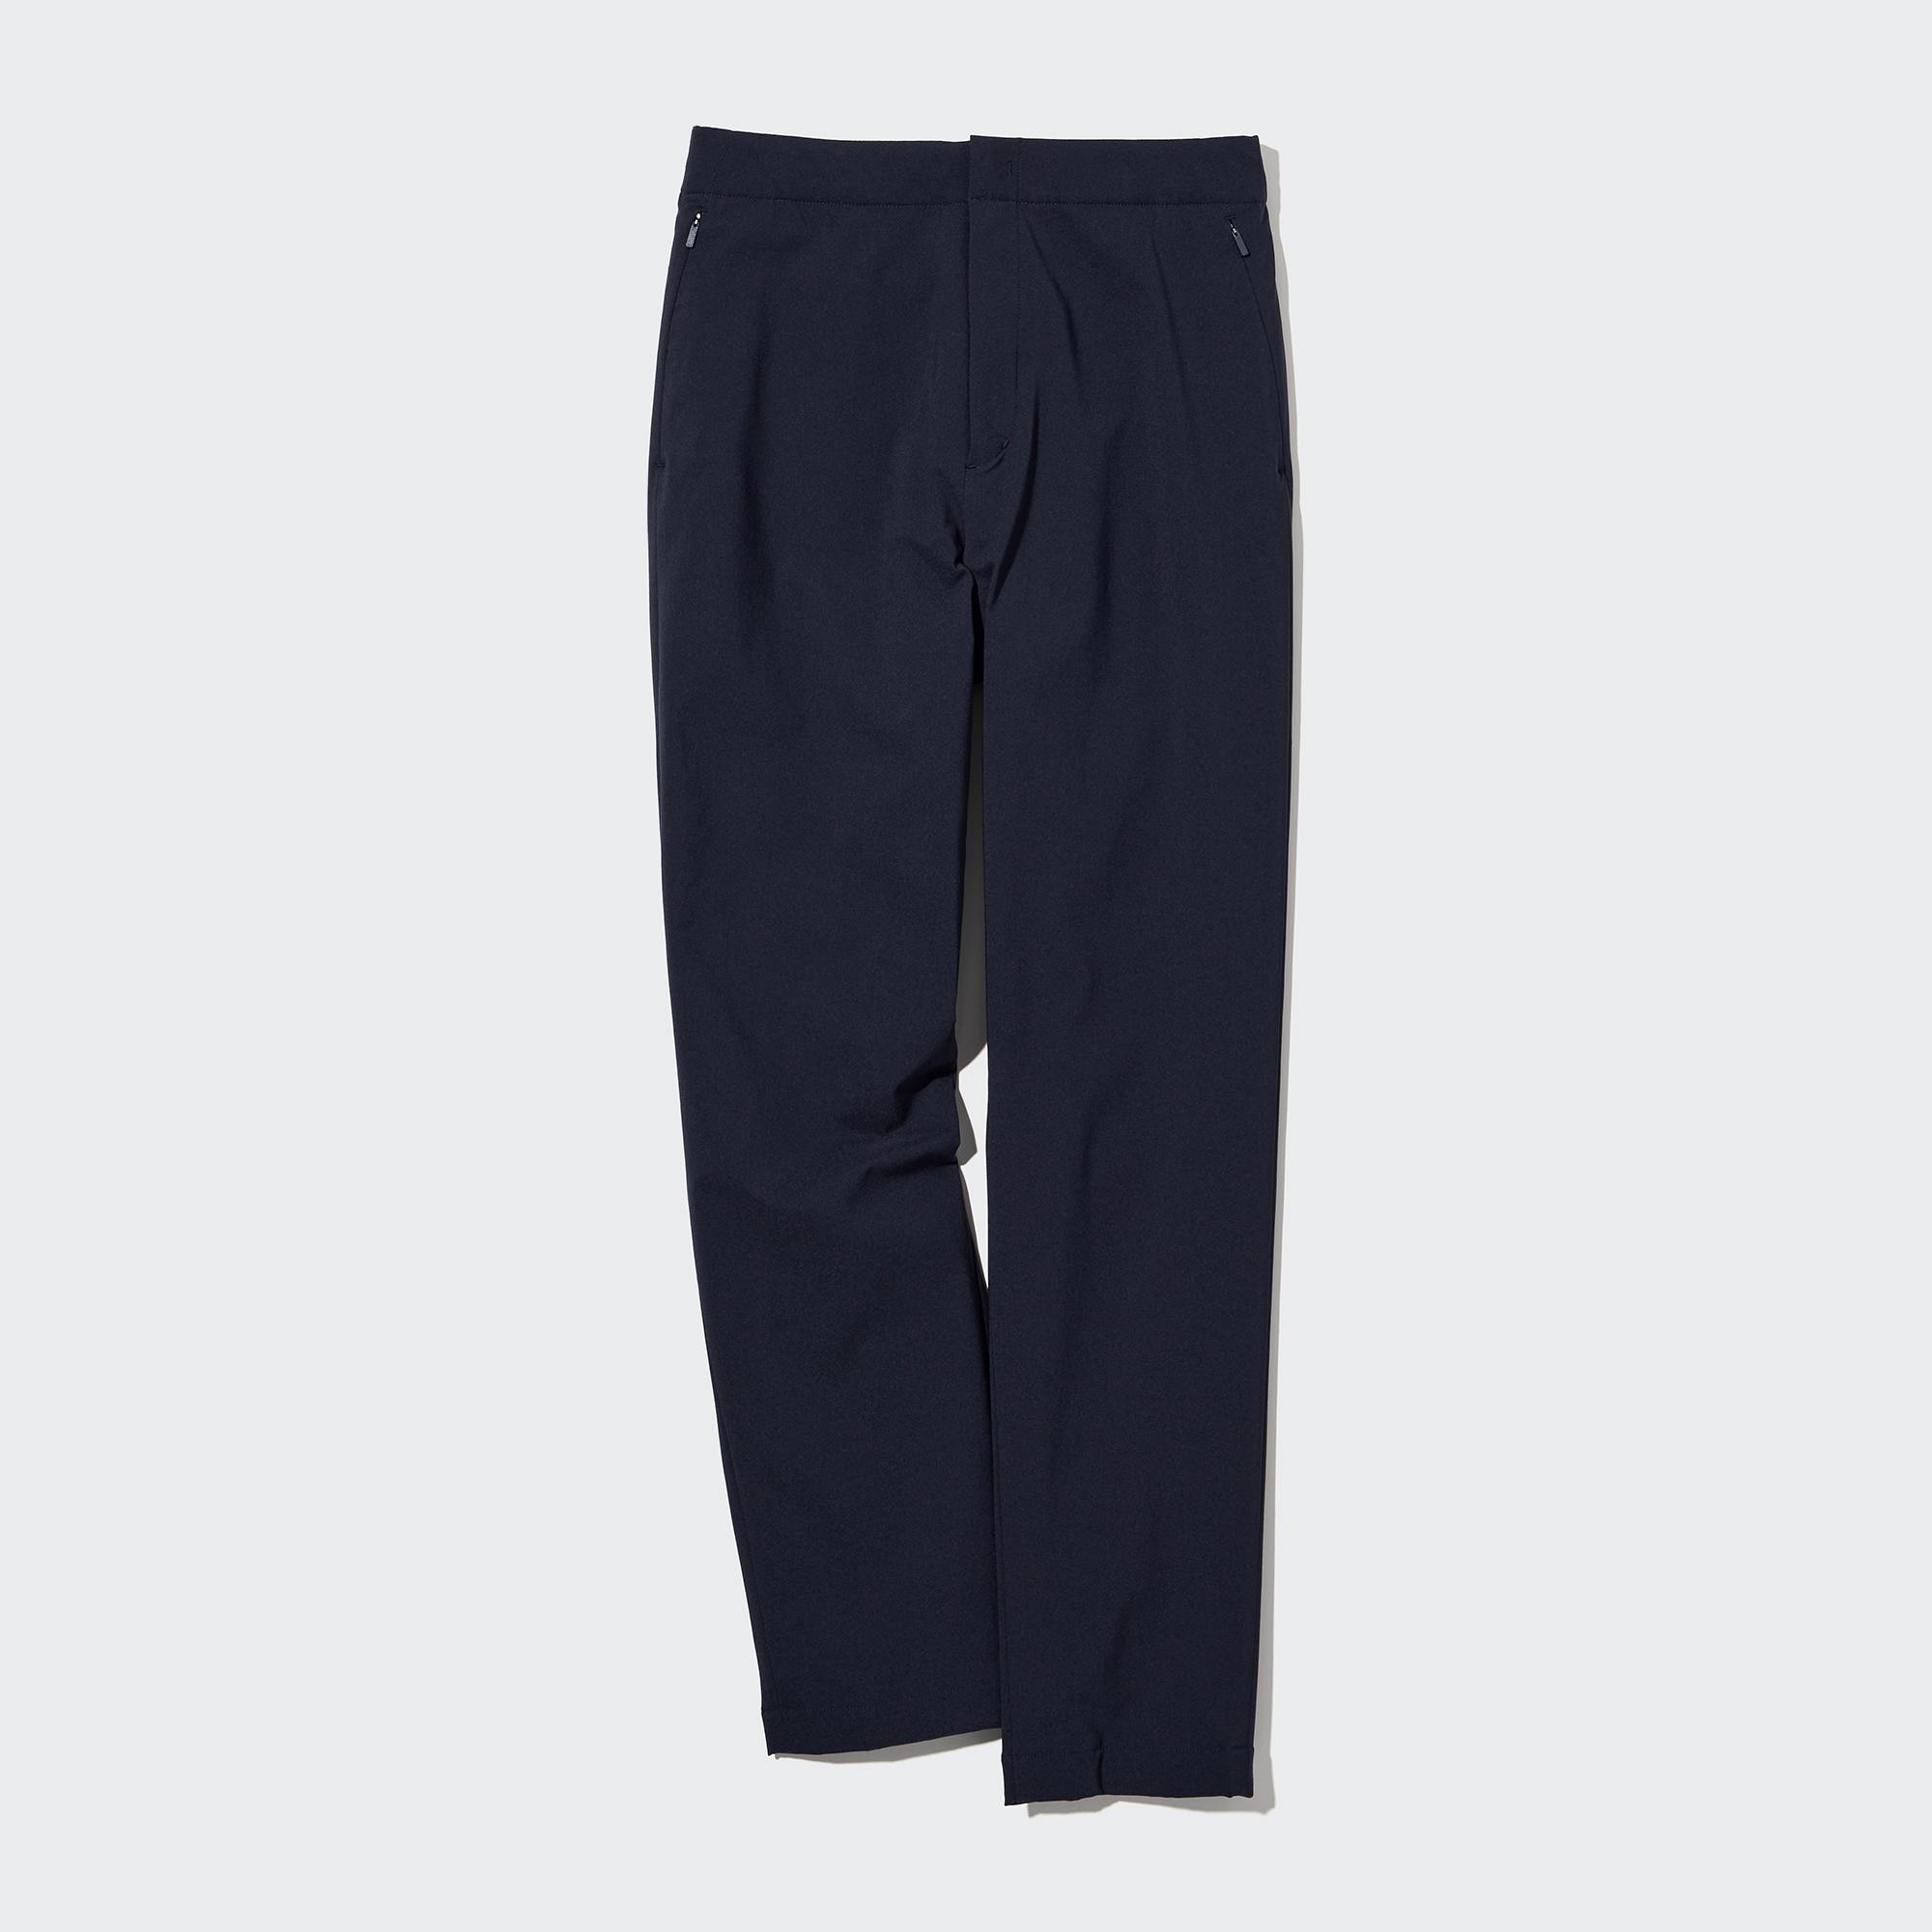 Shop looks for「HEATTECH Warm Lined Pants、UV Protection Twill Cap」| UNIQLO TH